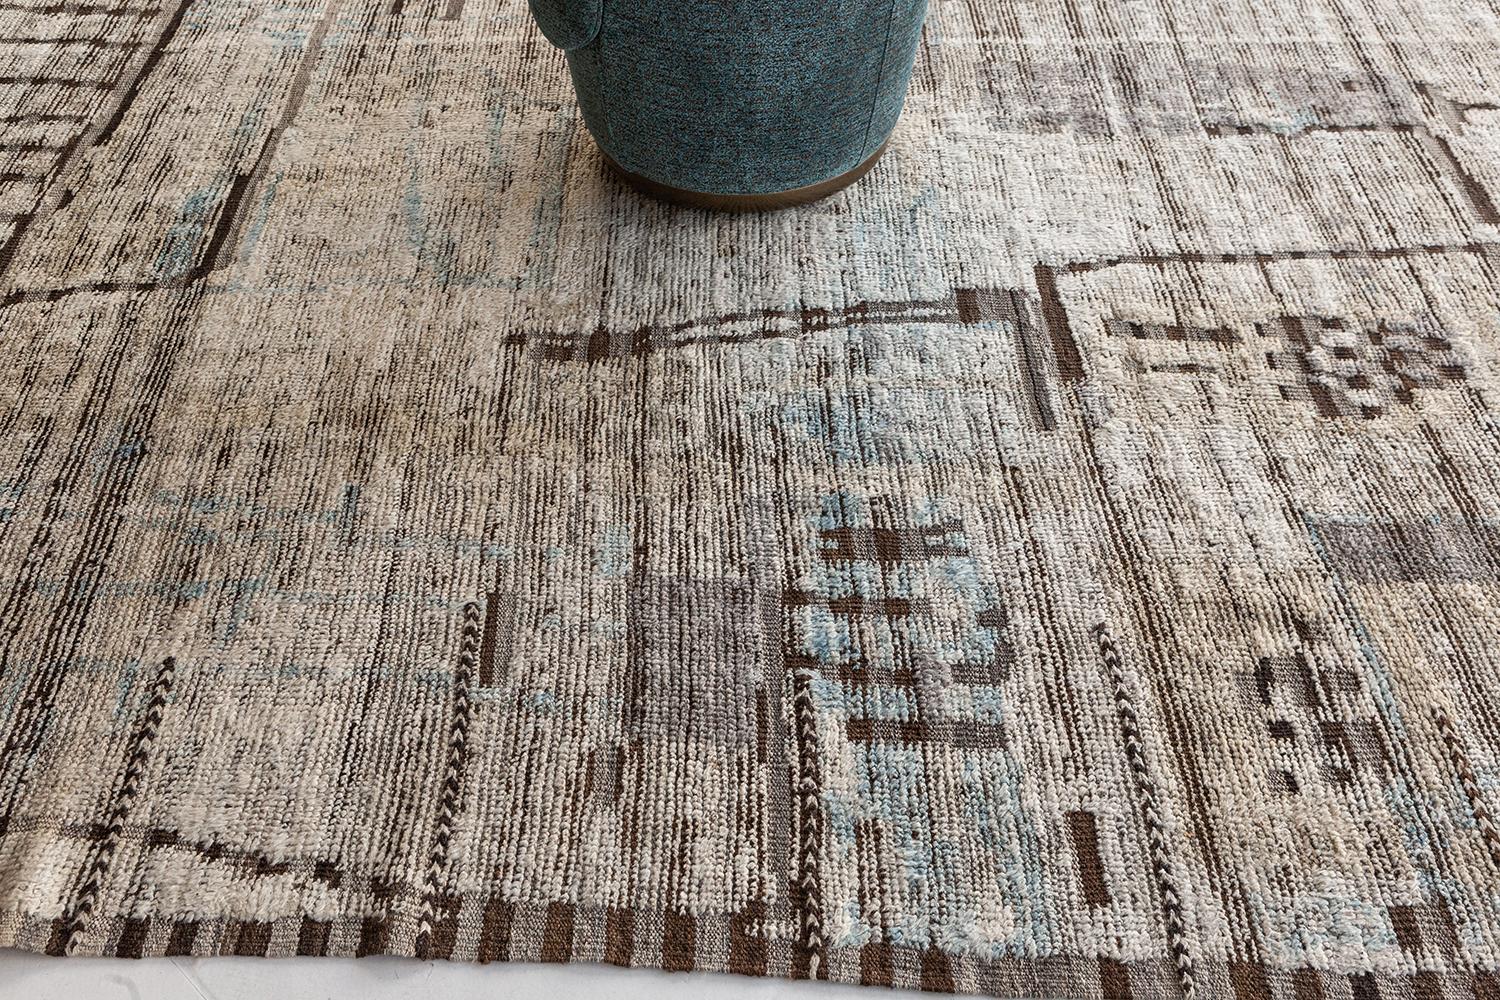 Meliska' is an exquisitely textured rug with irregular motifs inspired from the Atlas Mountains of Morocco. Earthy tones of ivory and chocolate brown surrounded by umber brown shag work cohesively to make for a great contemporary interpretation for